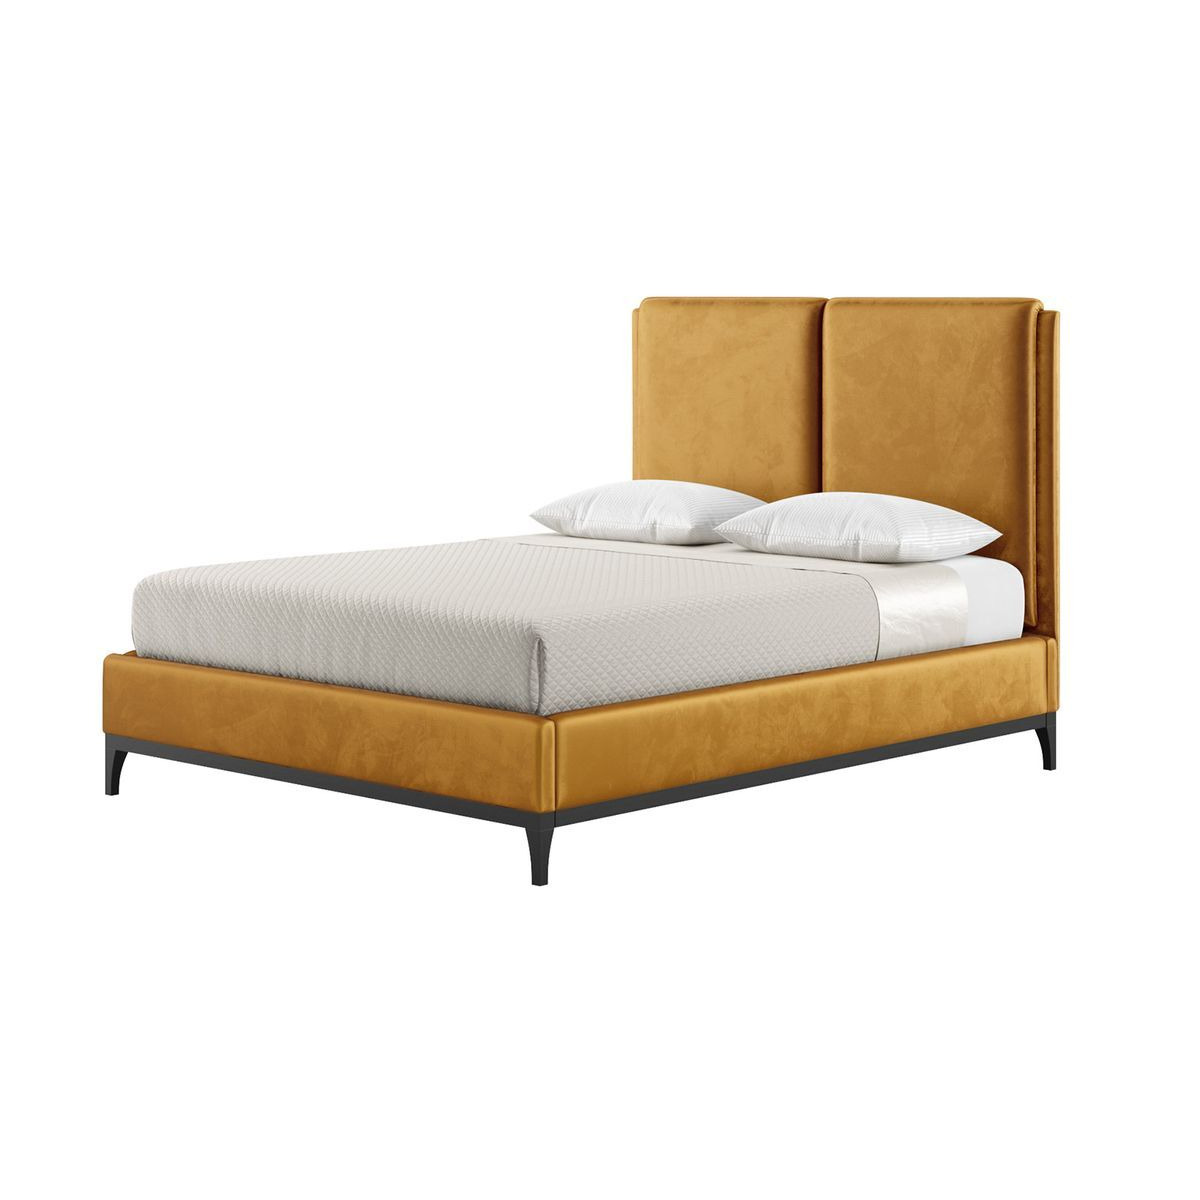 Emily 5ft King Size Bed Frame with contemporary twin panel headboard, mustard, Leg colour: black - image 1